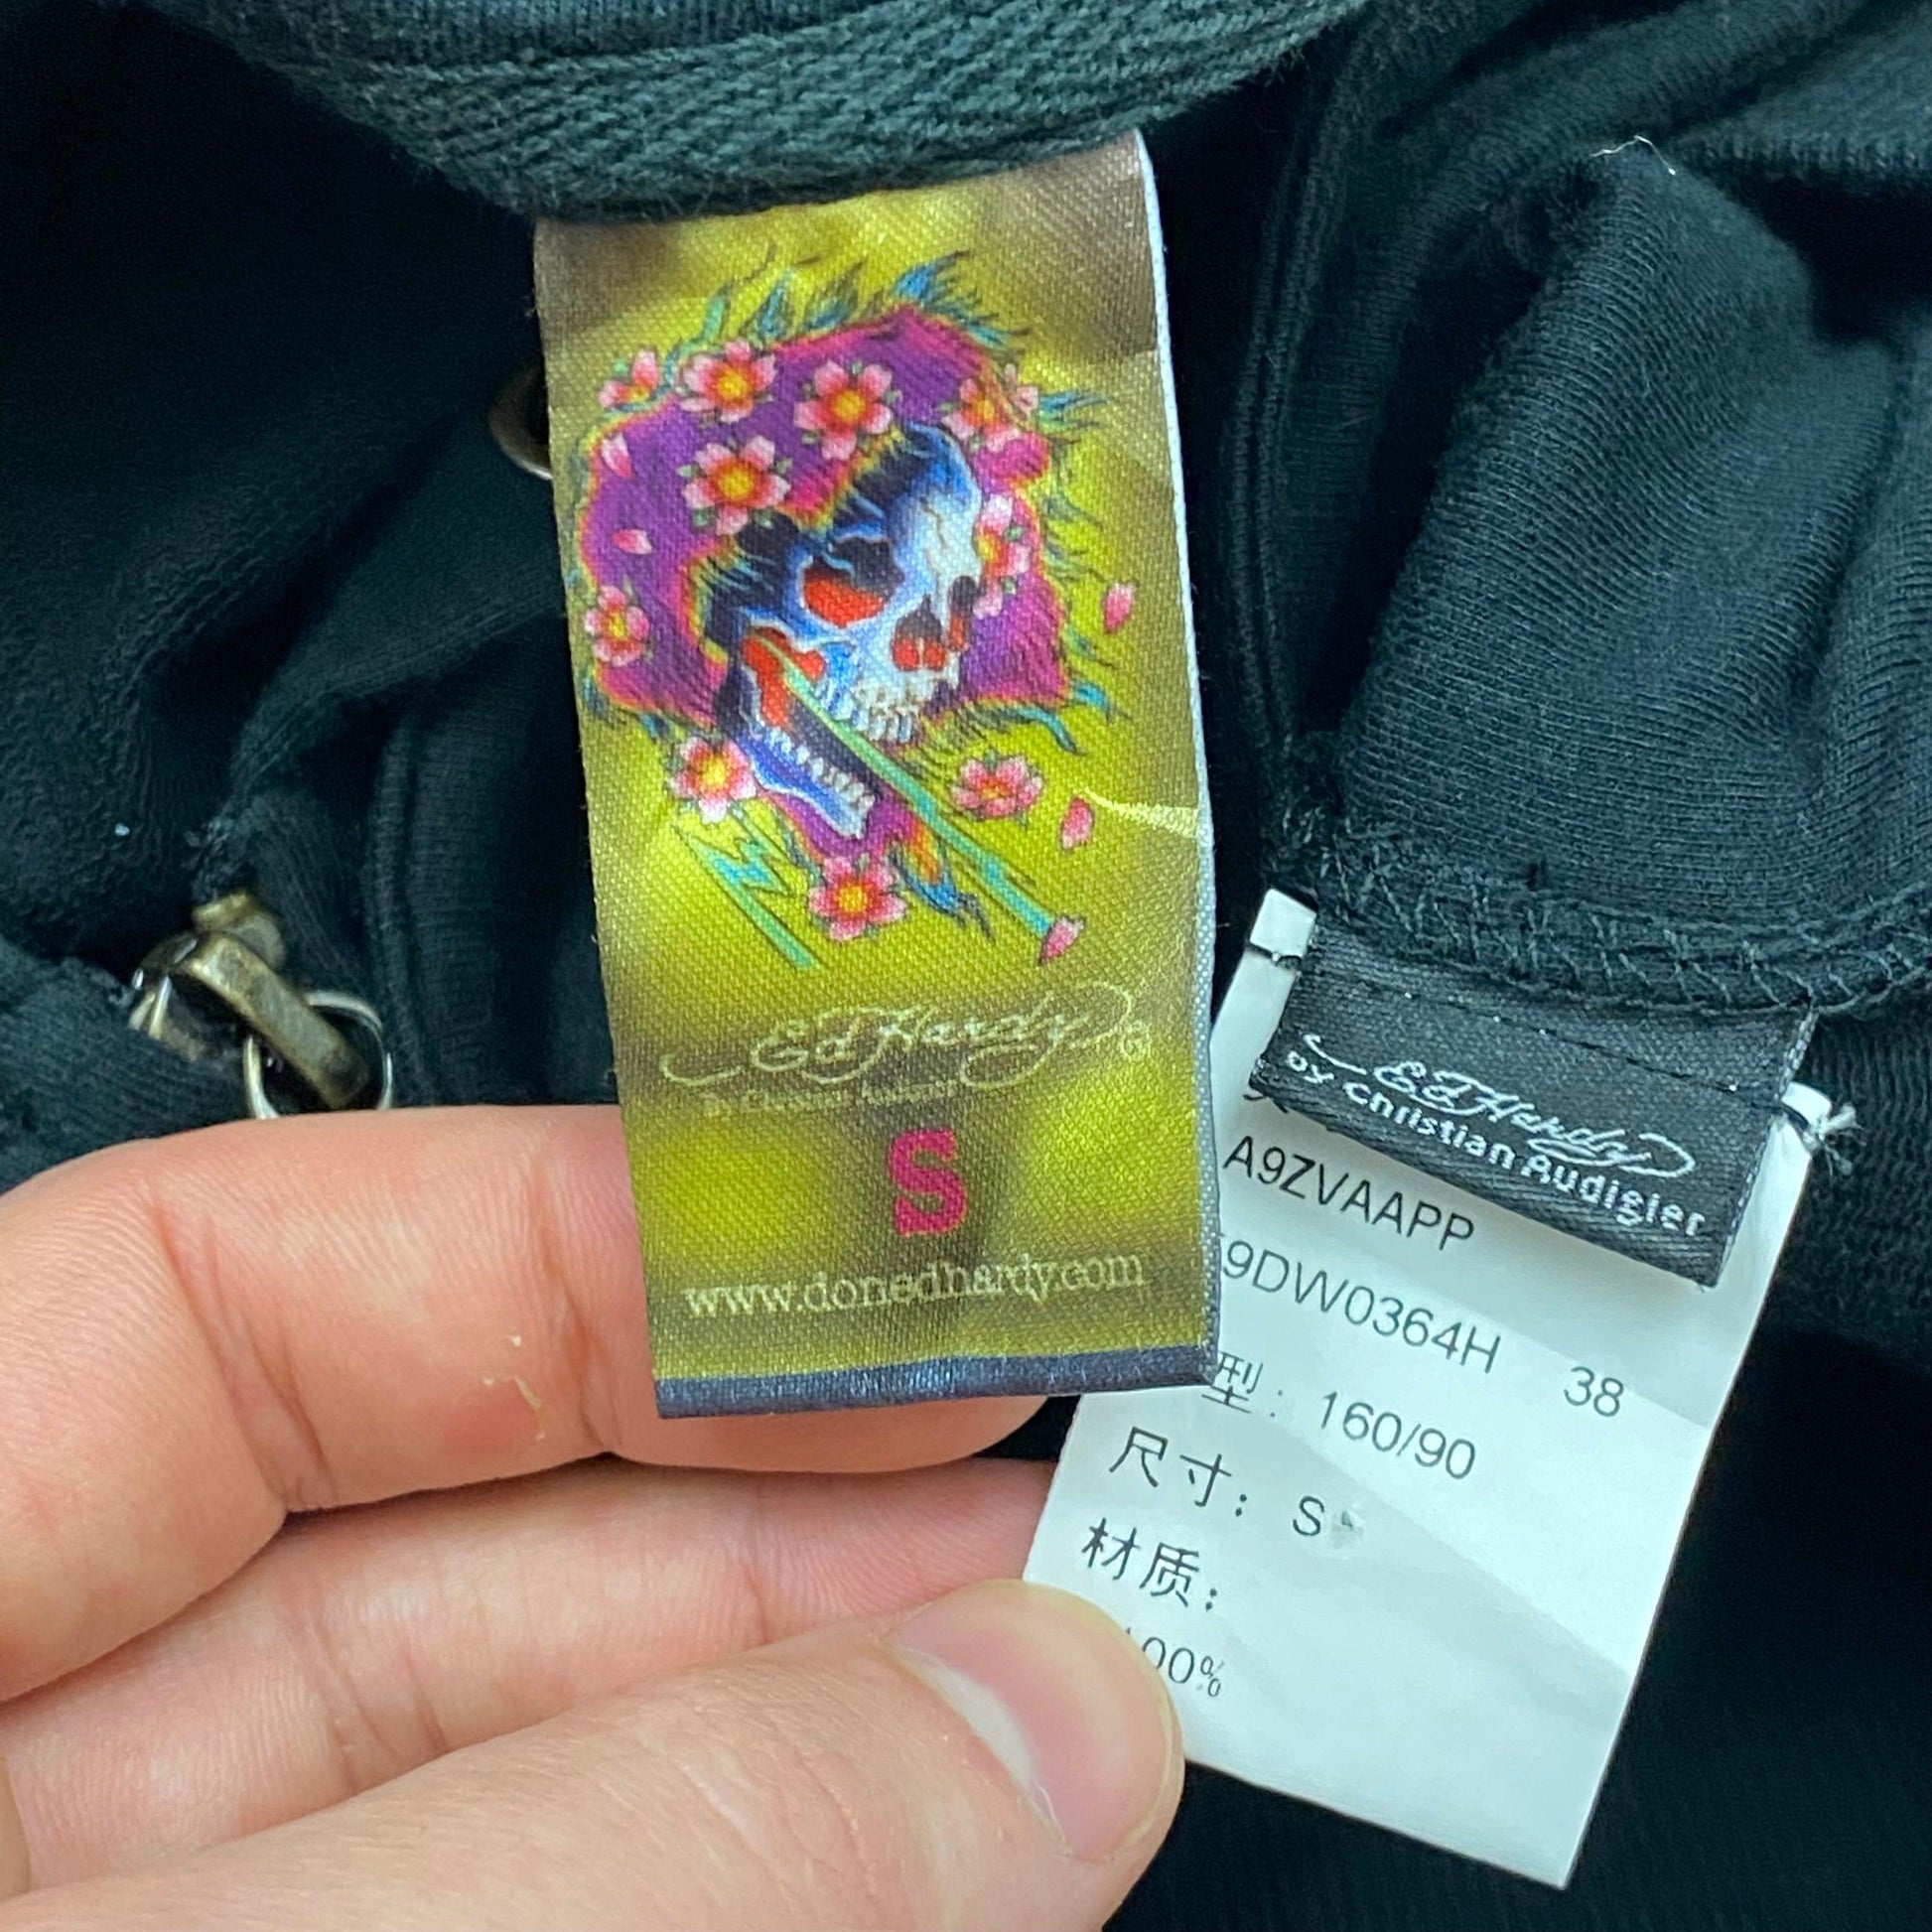 Ed Hardy by Christian Audigier Hoodie - S - Known Source